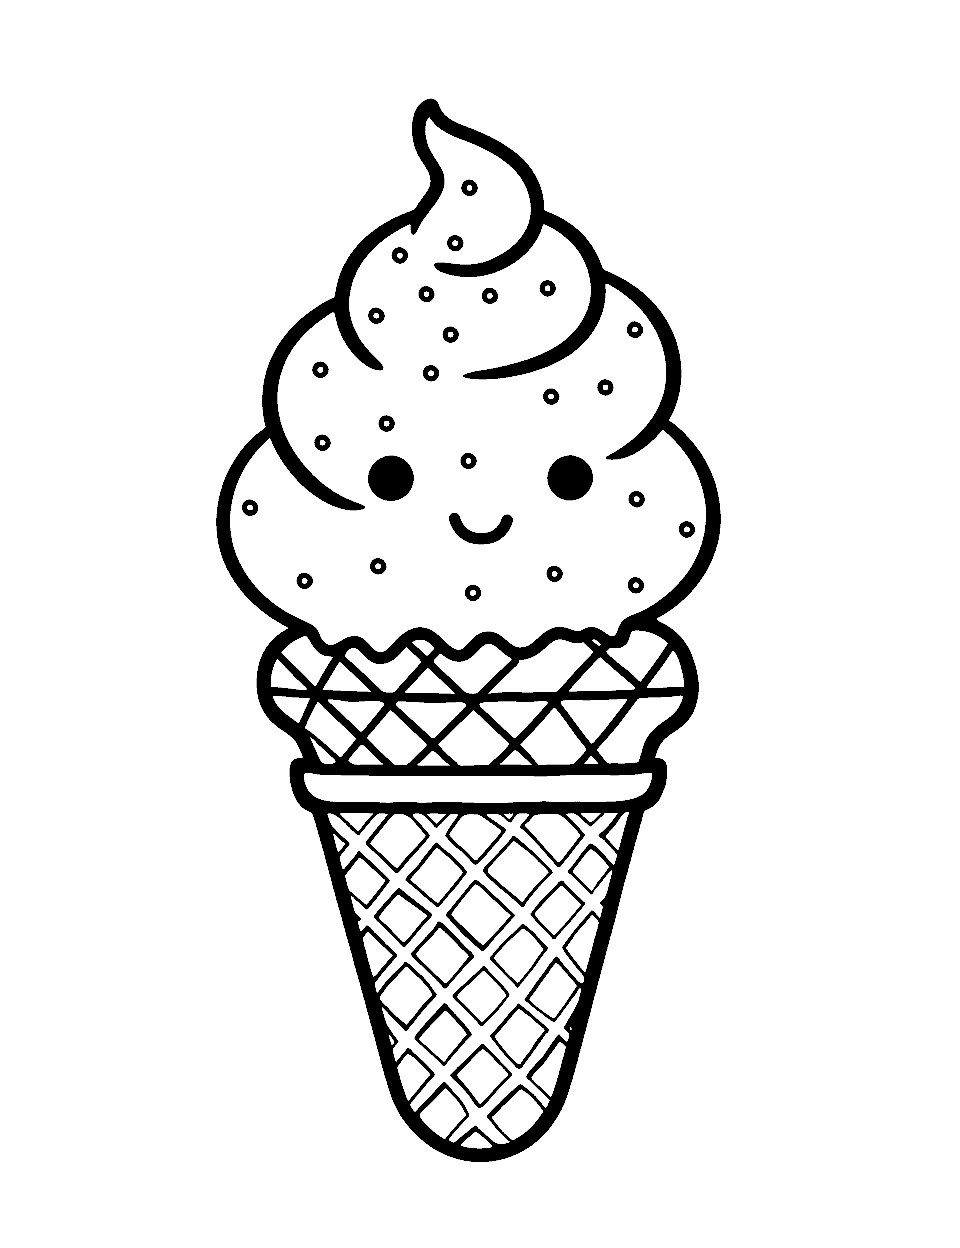 Kawaii Ice Cream Cone Cute Coloring Page - A cute ice cream cone with a smiling face and colorful sprinkles.